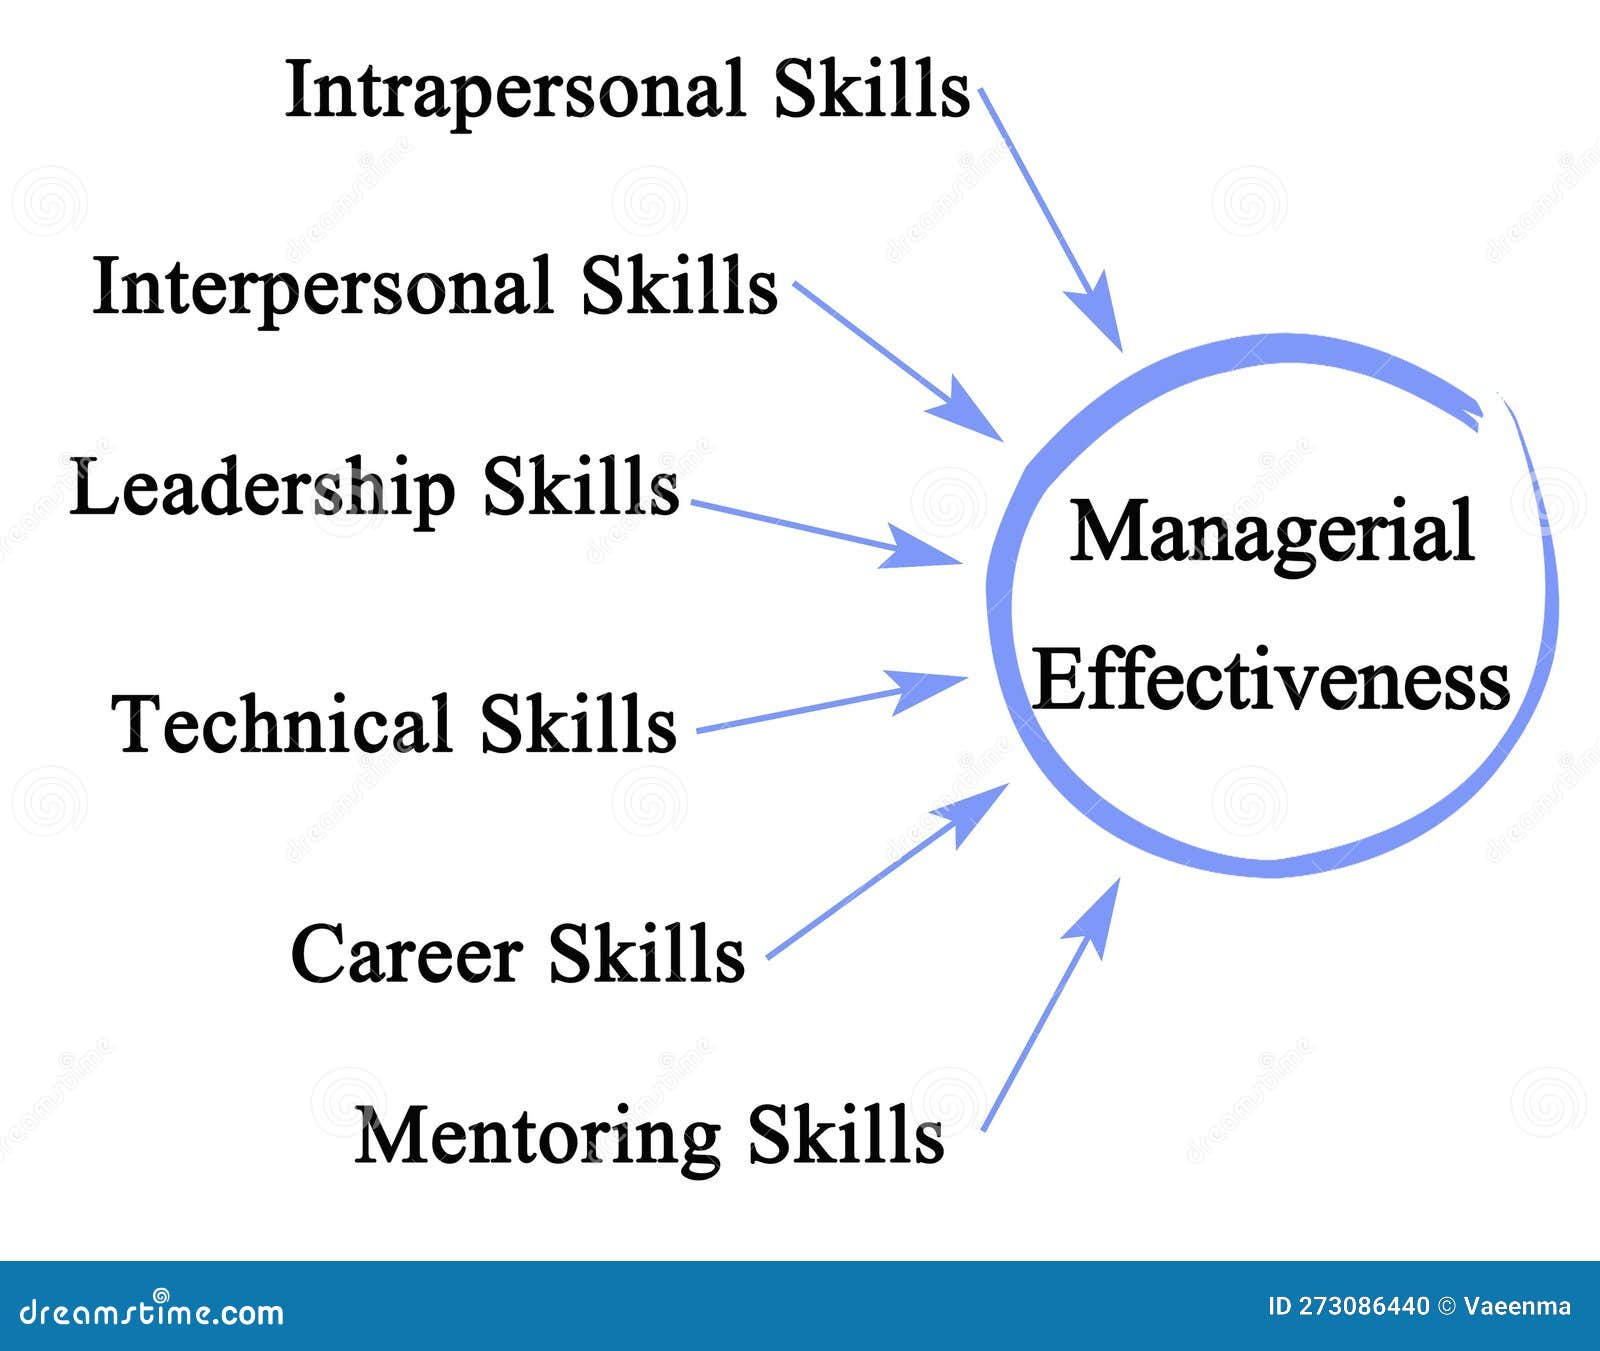 drivers of managerial effectiveness